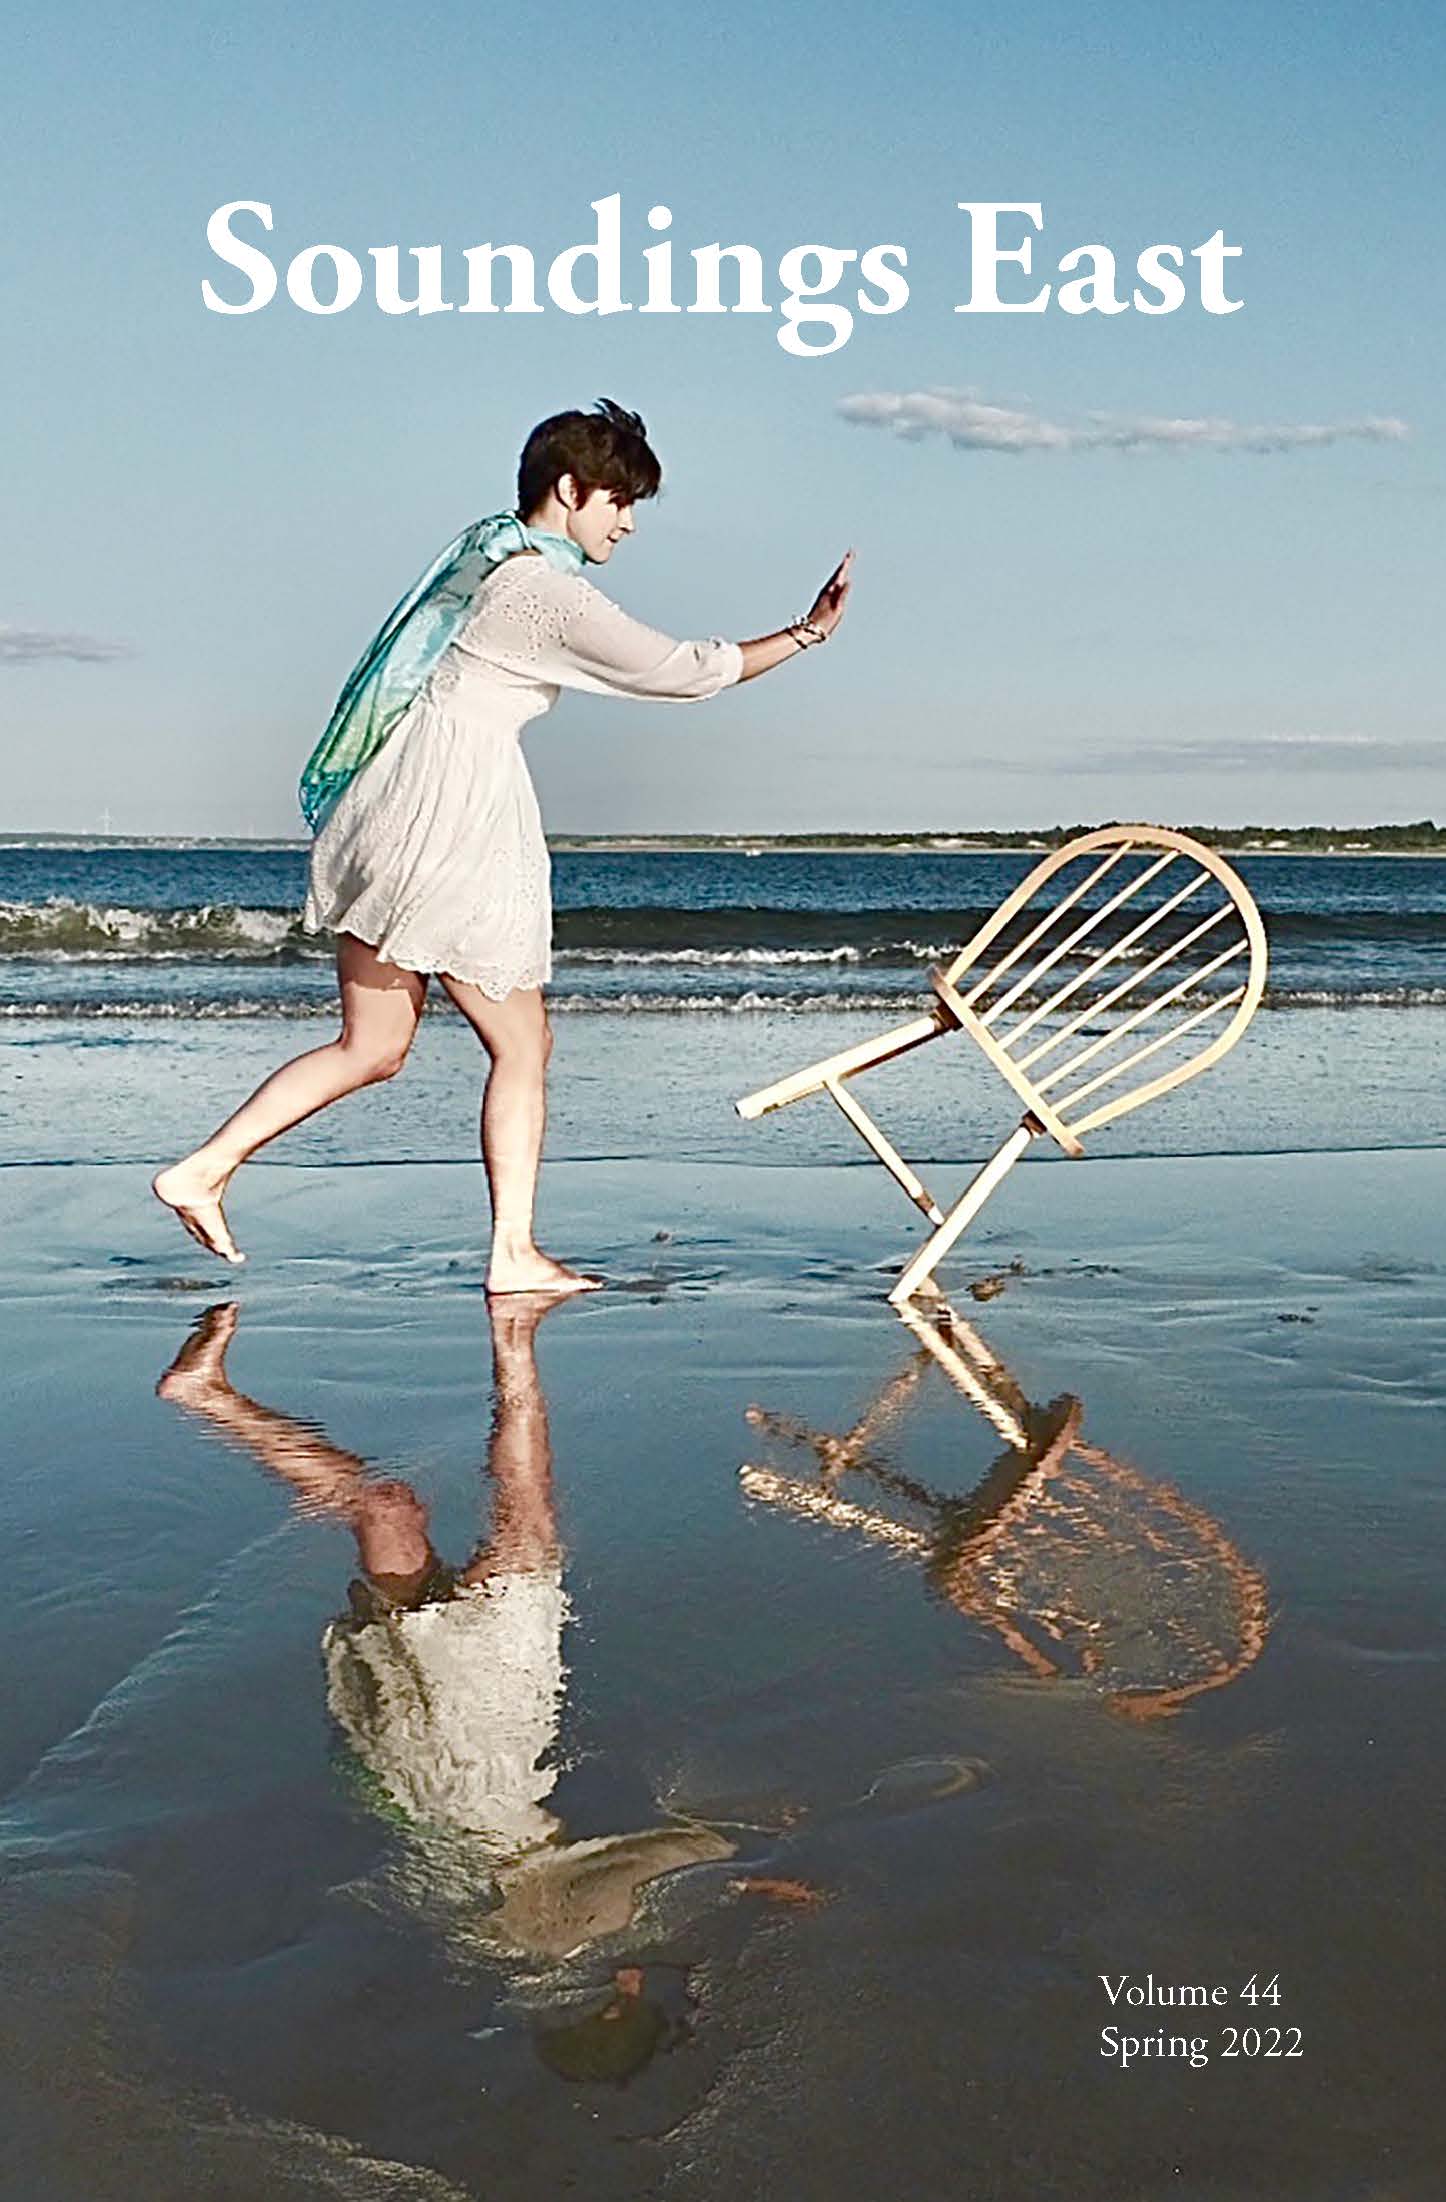 Soundings East Fall 2022 Cover: Photo of a person in a white dress pushing a white chair on the shoreline of a beach.